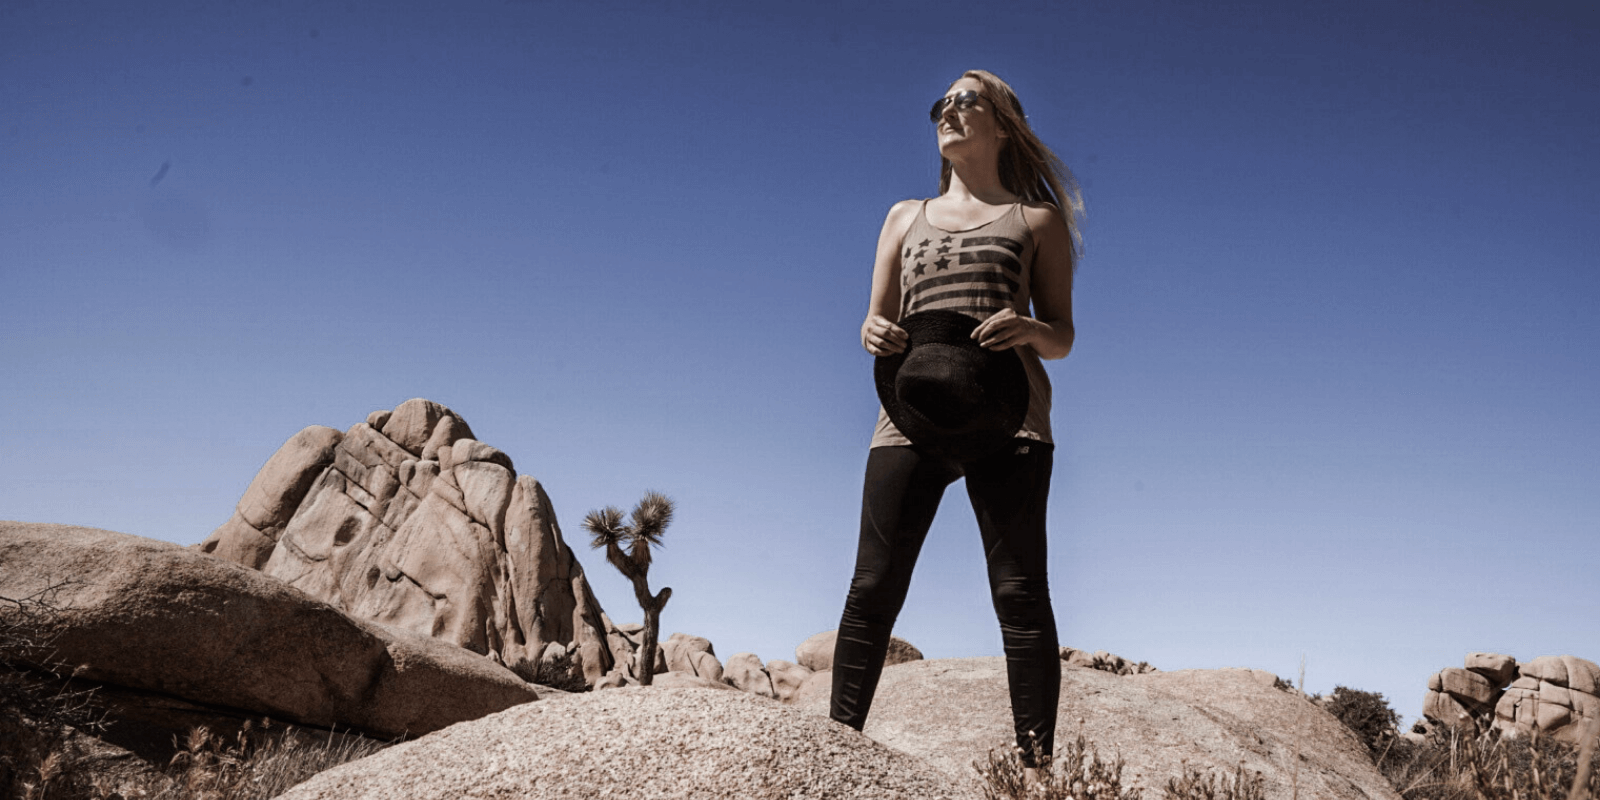 4 Clothing Essentials Needed for Desert Hiking